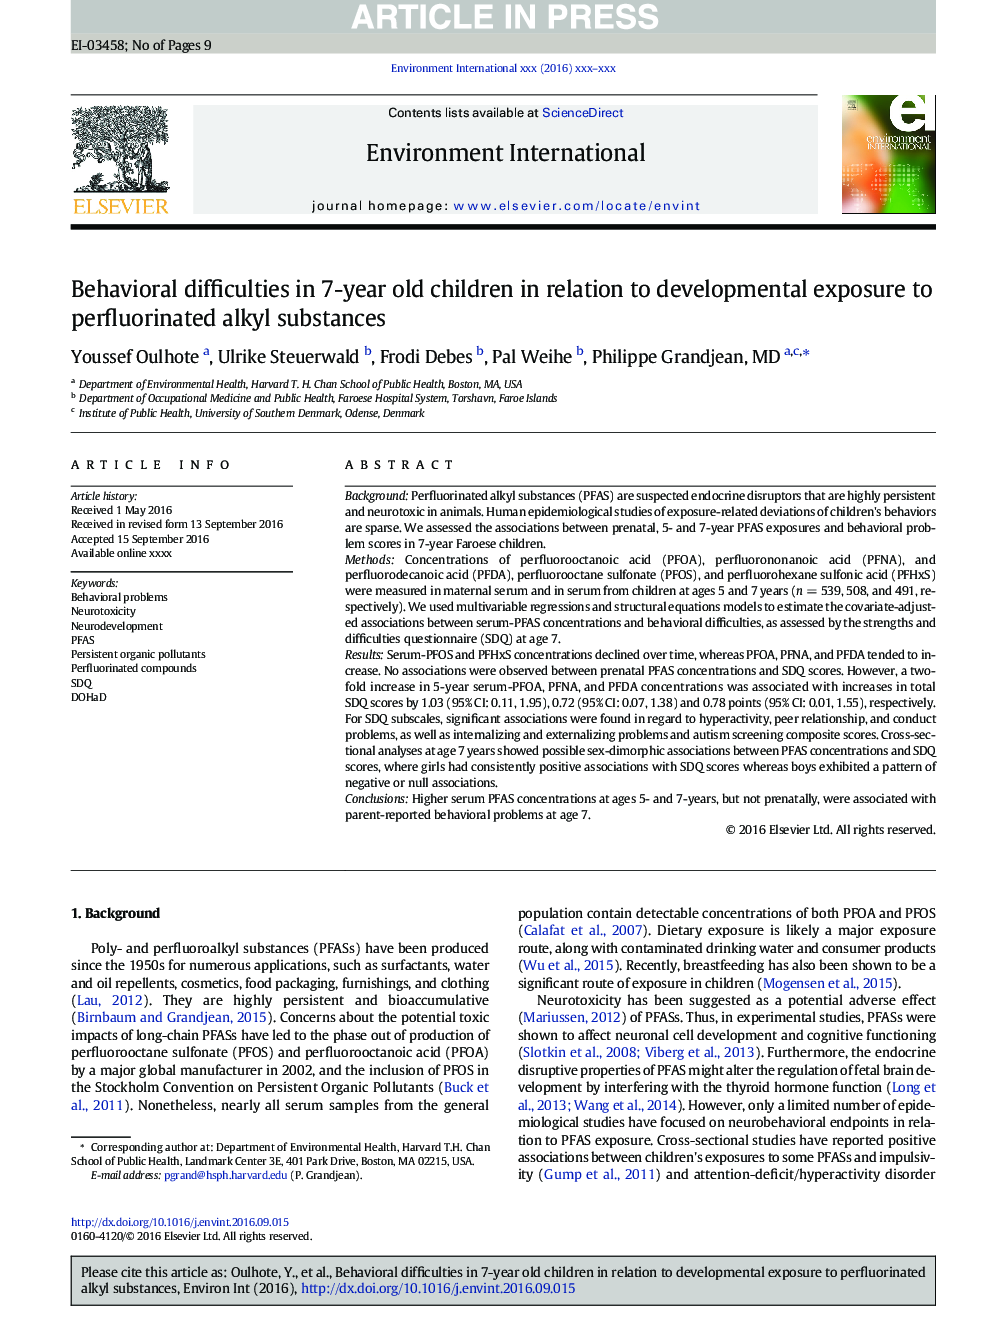 Behavioral difficulties in 7-year old children in relation to developmental exposure to perfluorinated alkyl substances